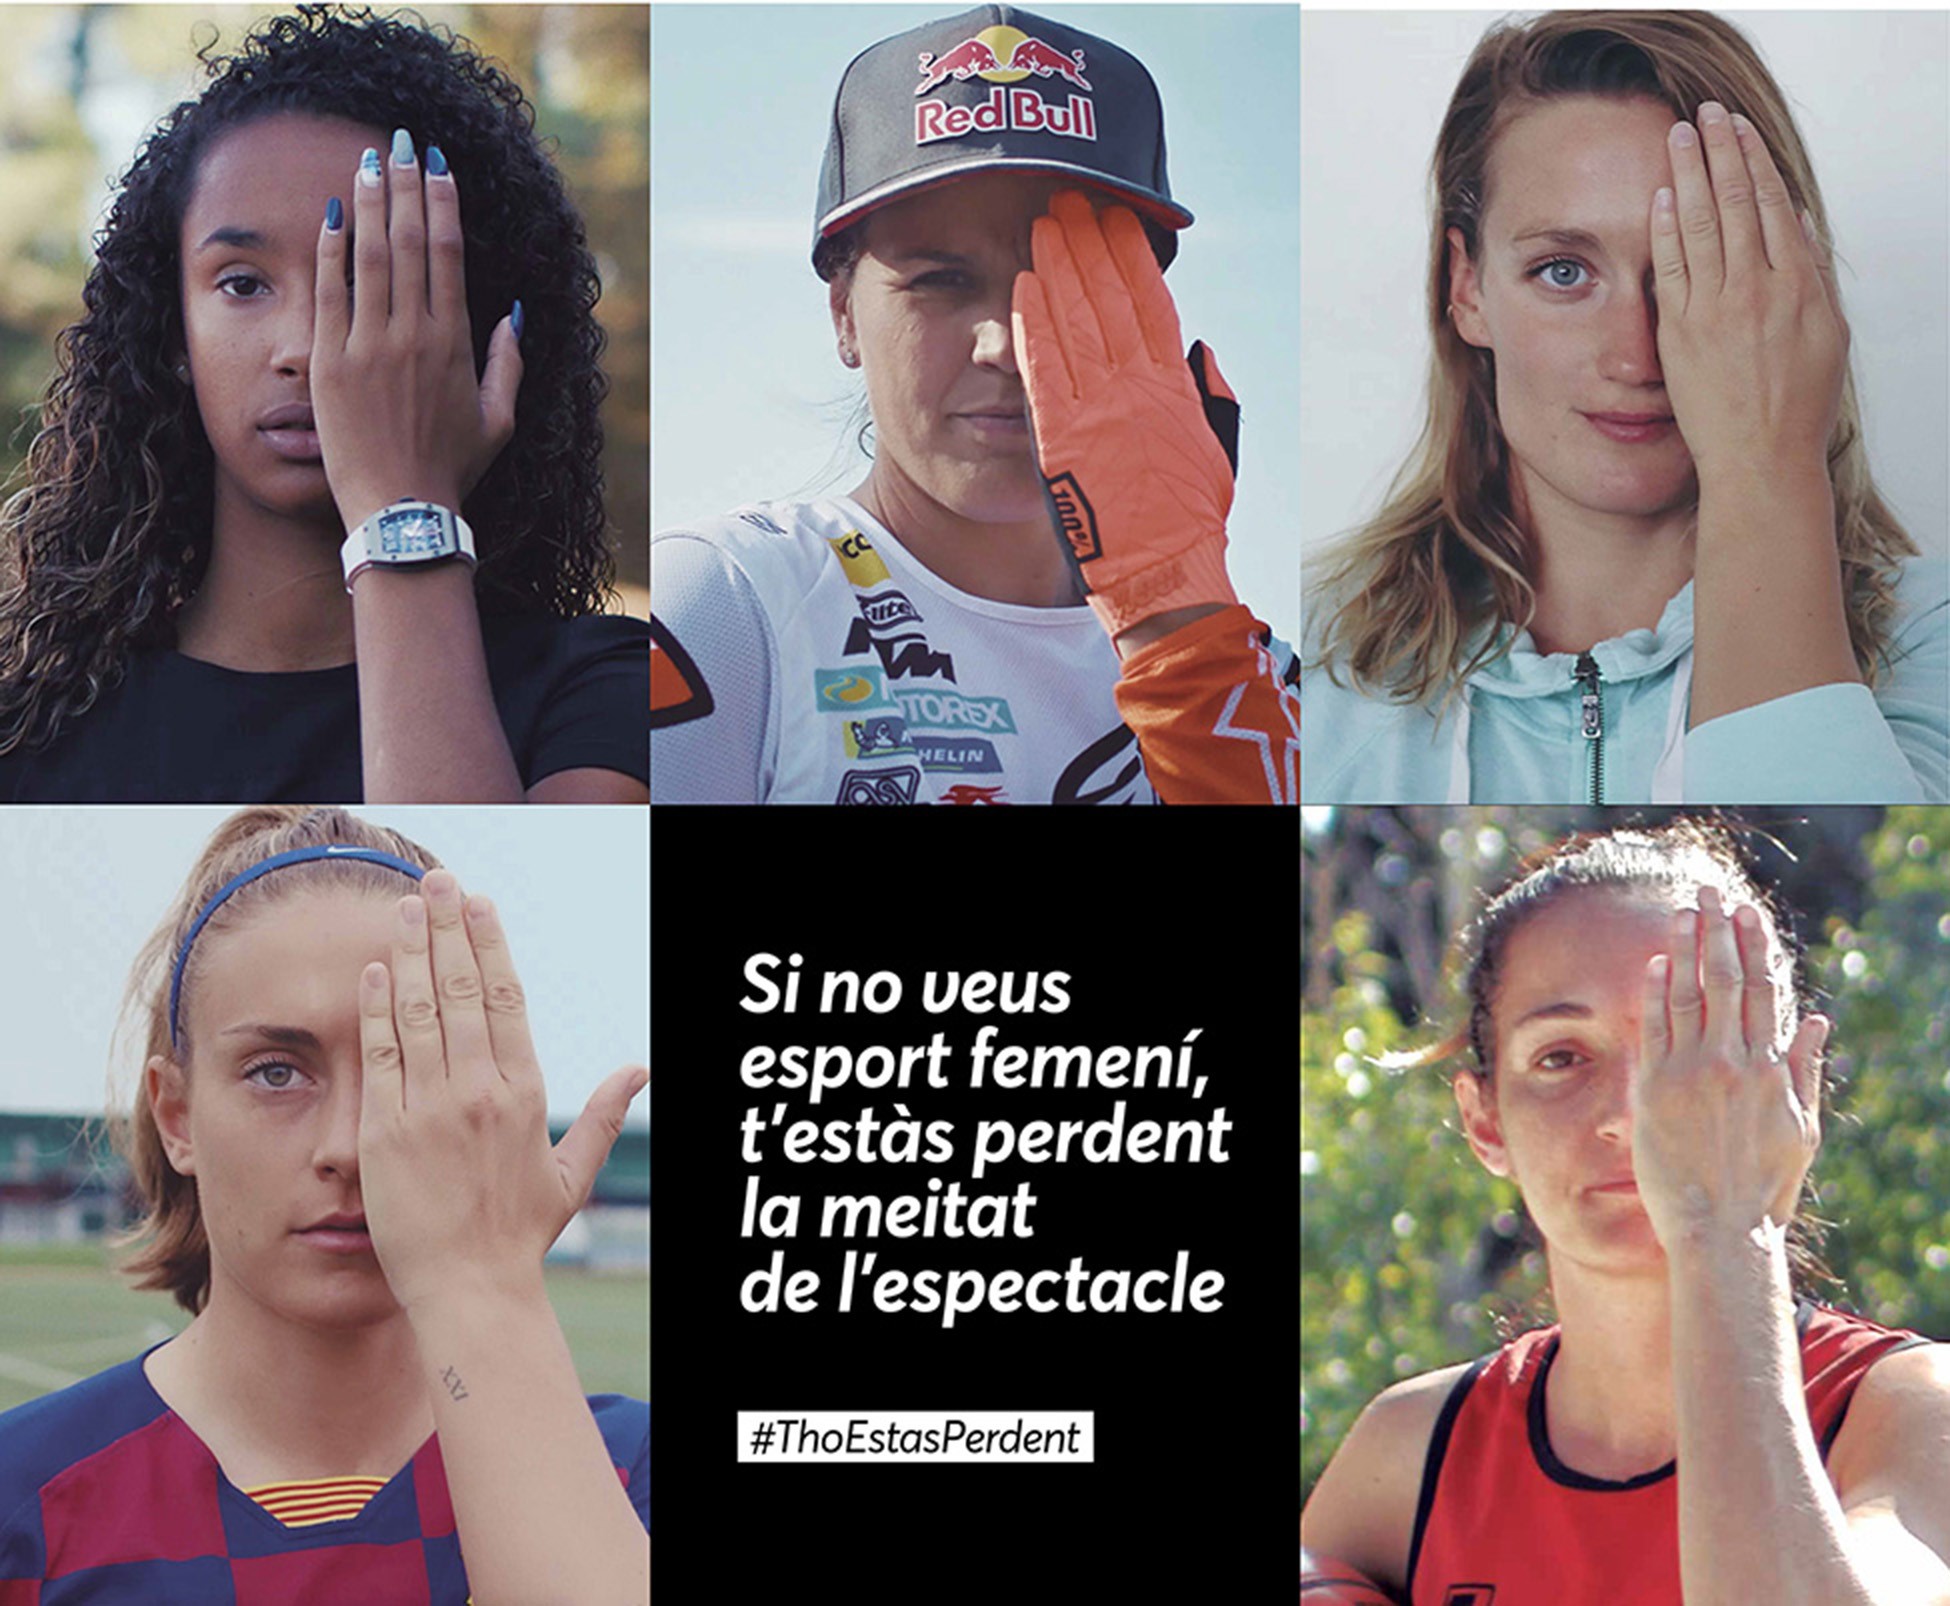 Promotional image of the campaign #ThoEstasPerdent, with some of the top Catalan sportswomen 